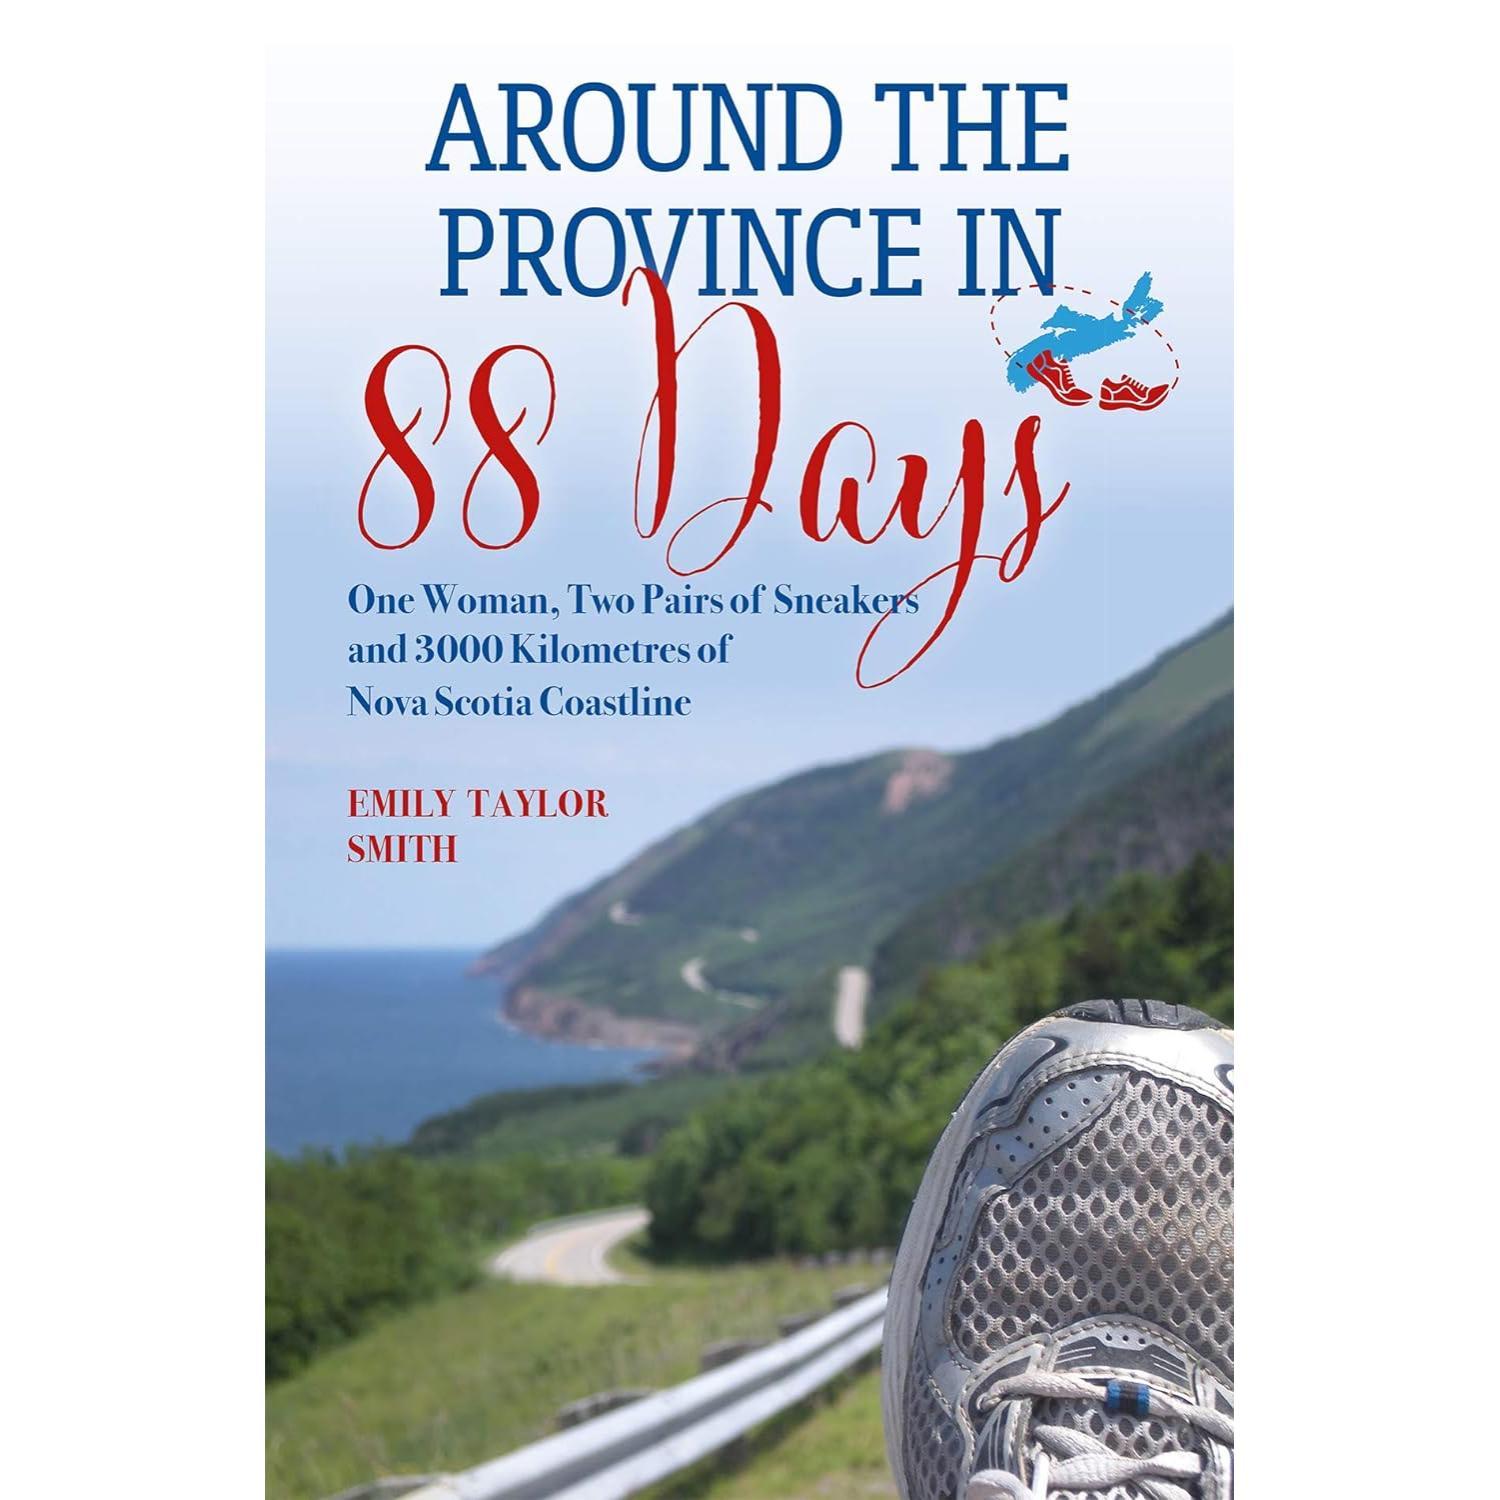 Around the Province in 88 Days: One Woman, Two Pairs of Sneakers and 3000 Kilometers of Nova Scotia Coastline